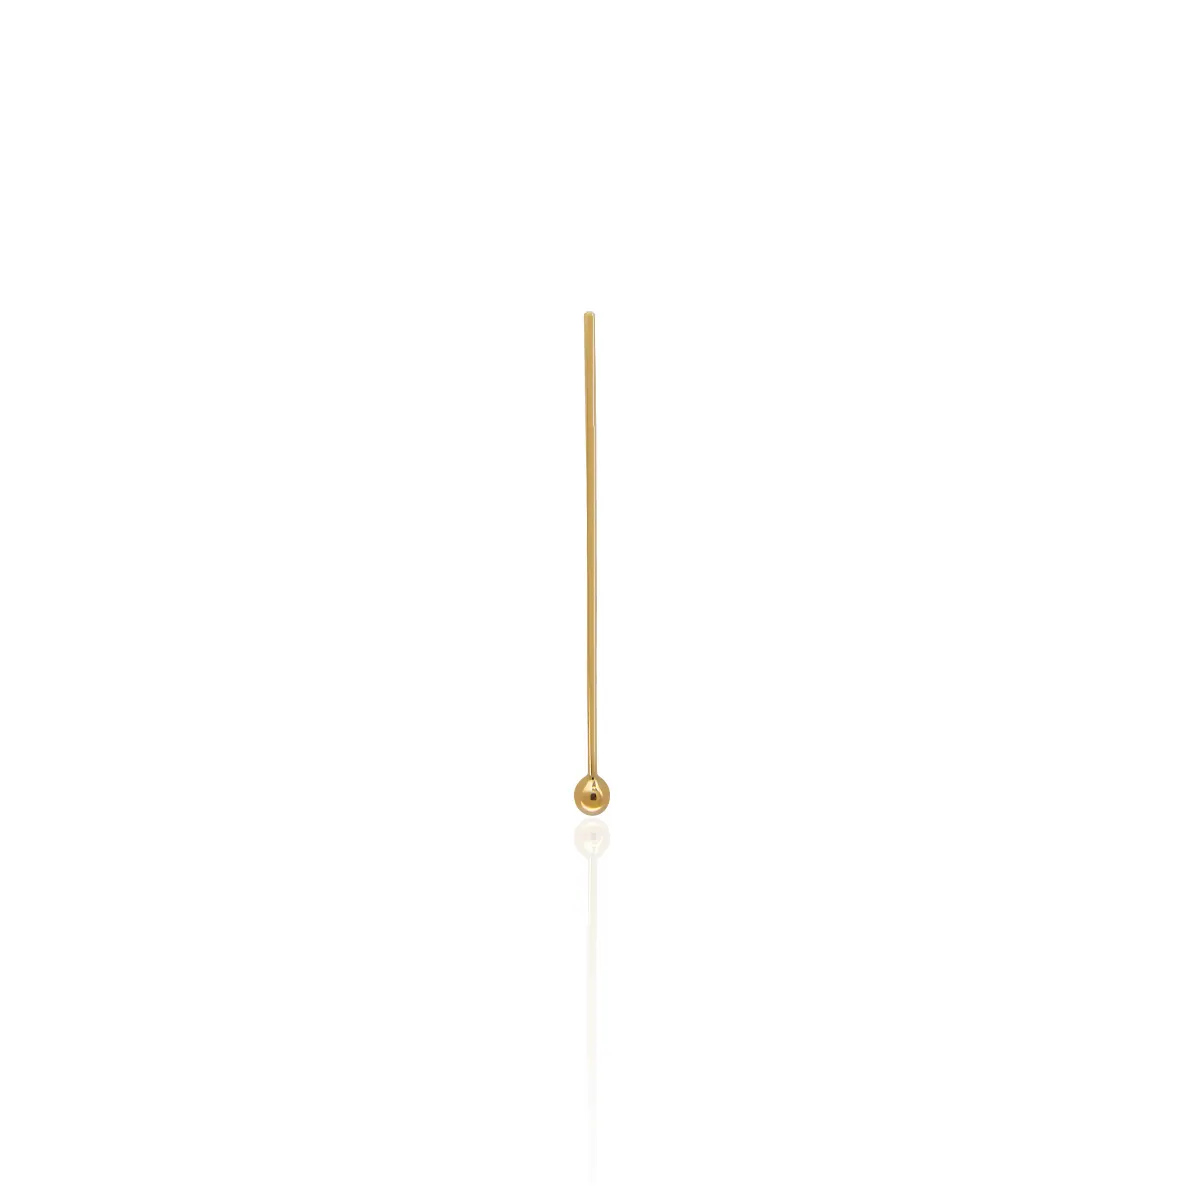 Wholesale 14K Solid Gold Ball Head Pins DIY Handmade Jewelry Accessories 9 Needle Pin For Jewelry Making